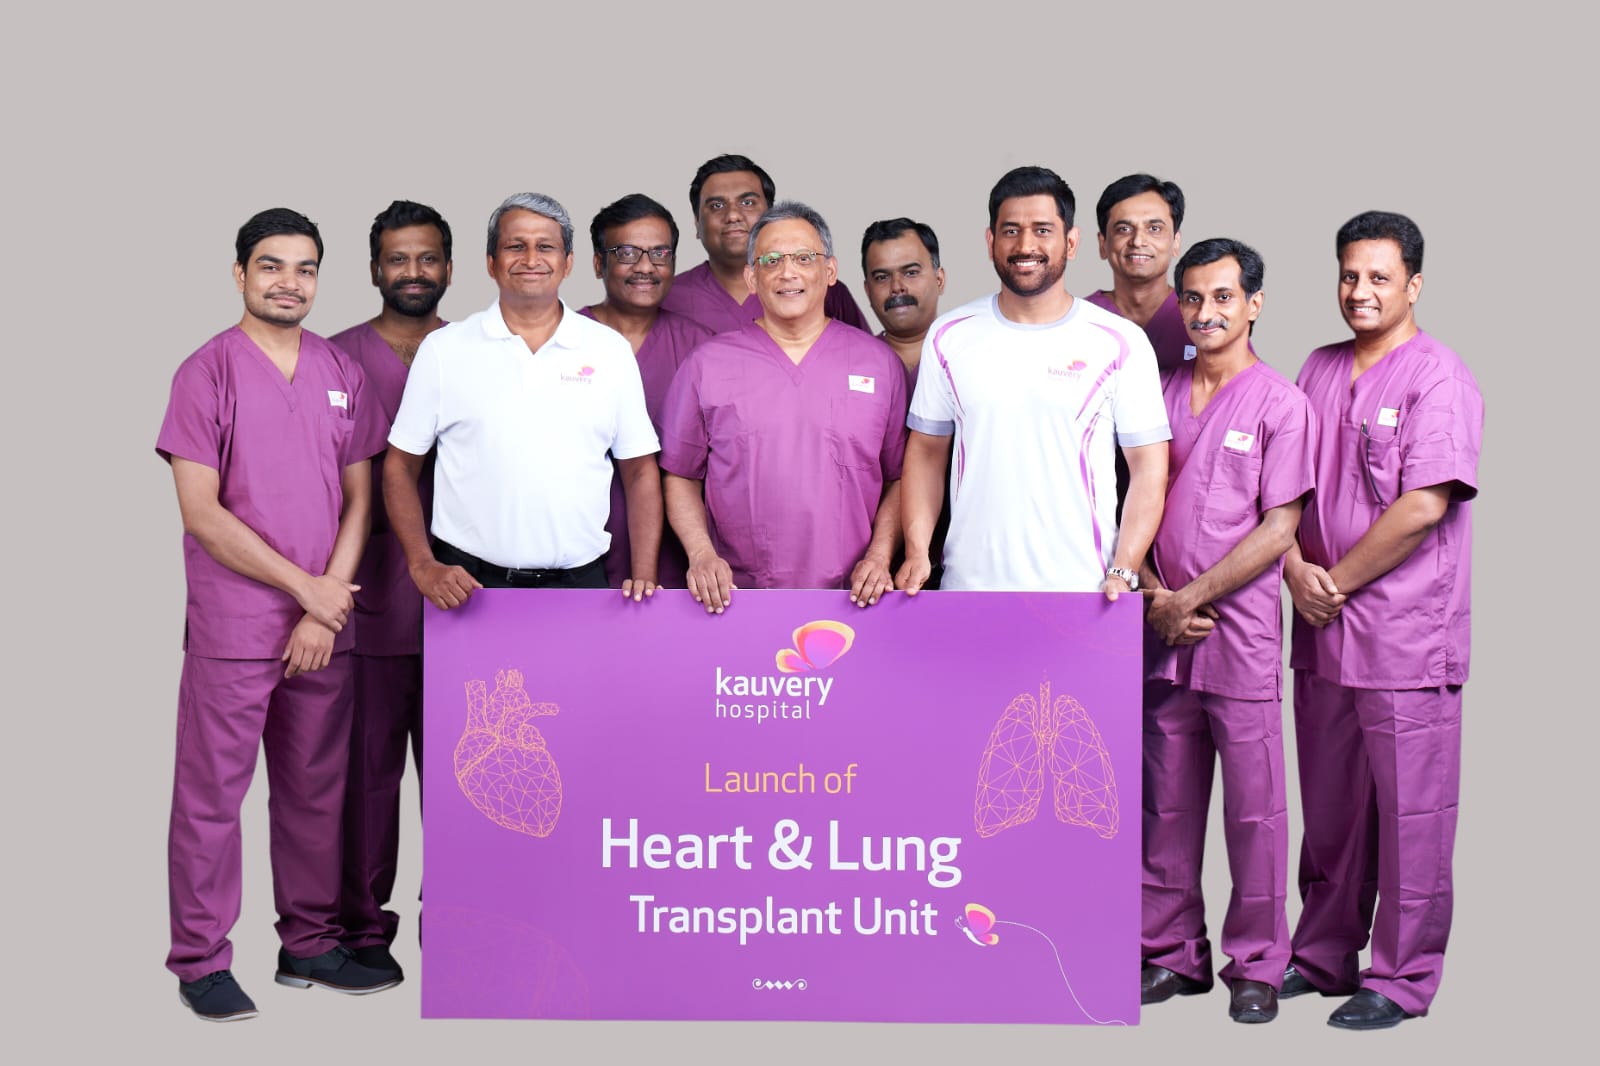 MS Dhoni with Heart and Lung Transplant Team Kauvery Hospital